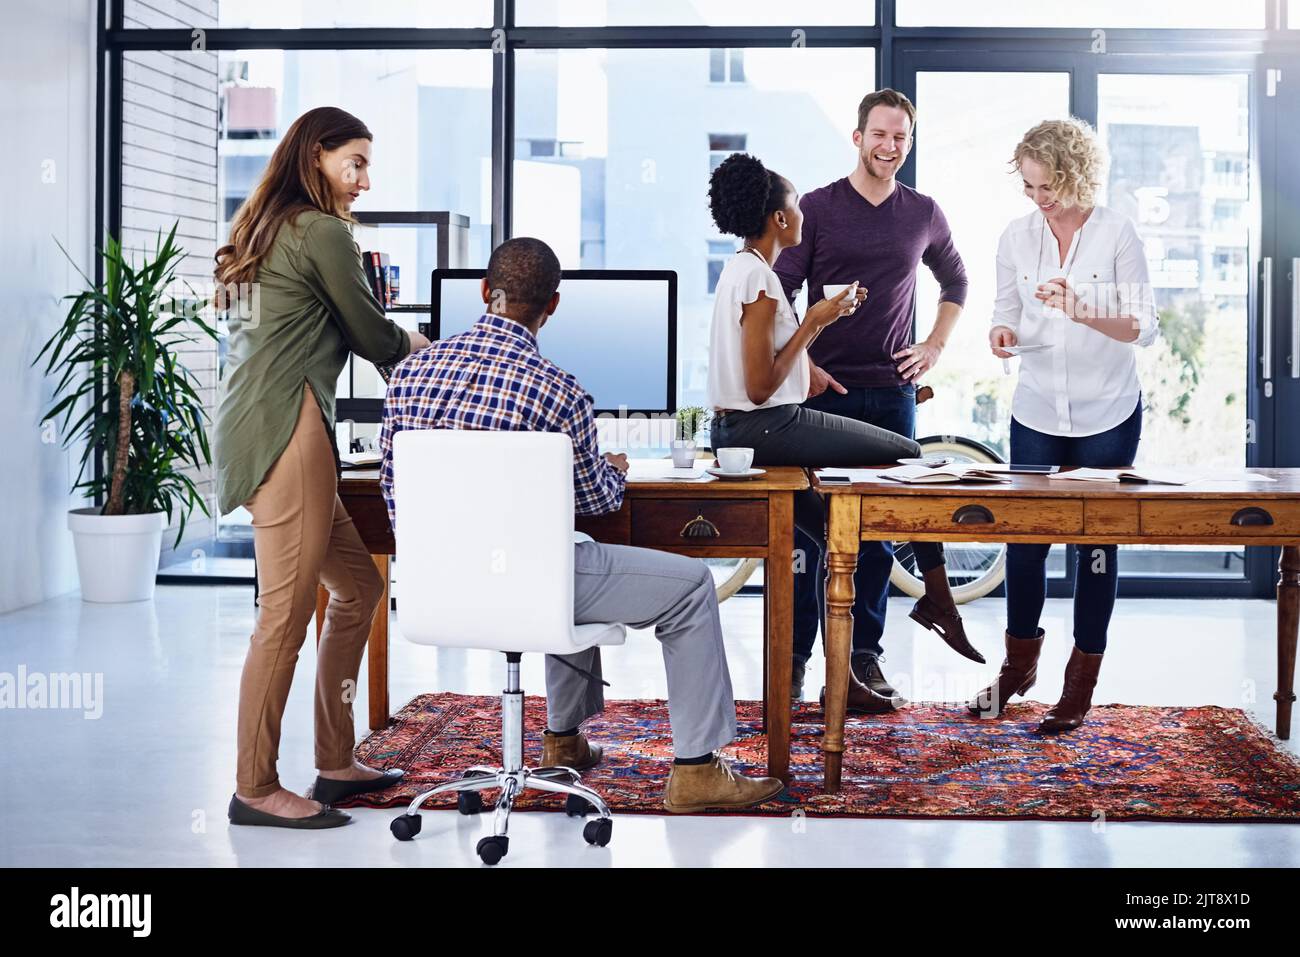 The creative workplace is an easygoing but productive space. a team of designers working together in the office. Stock Photo